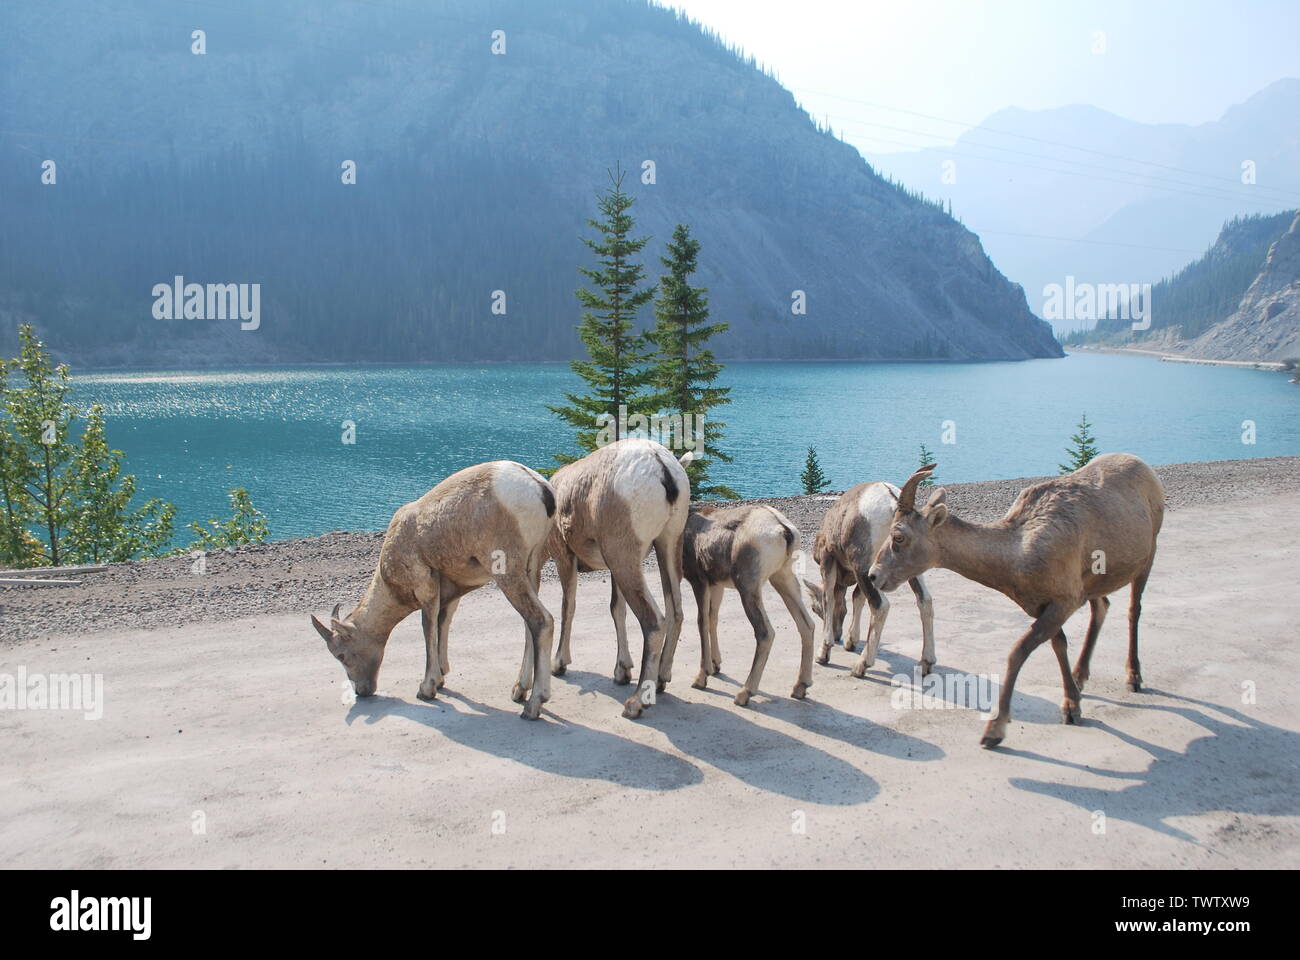 Big horn sheep lick salt from a mountain road Stock Photo